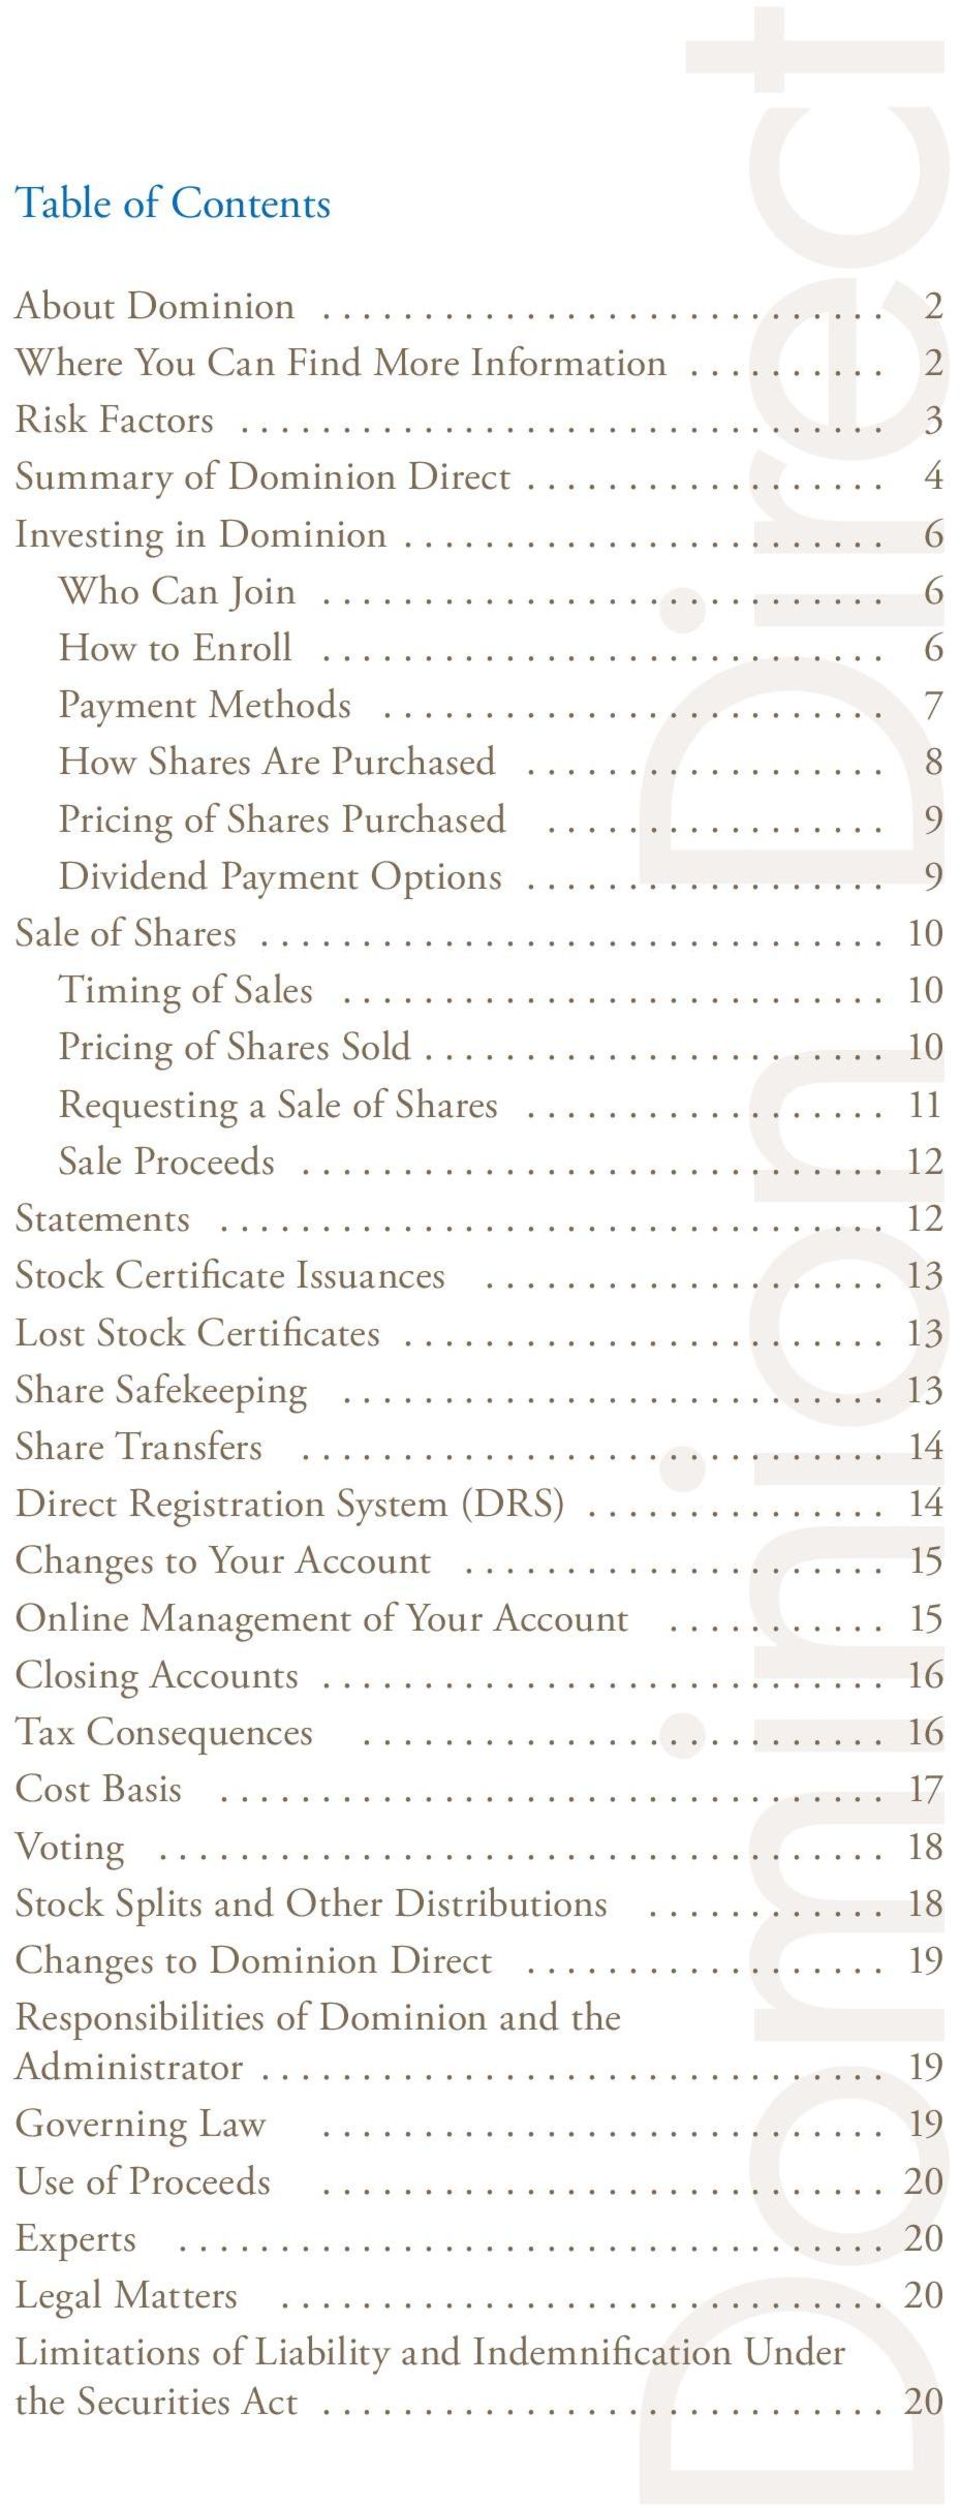 .. 10 Pricing of Shares Sold.... 10 Requesting a Sale of Shares... 11 Sale Proceeds... 12 Statements... 12 Stock Certificate Issuances... 13 Lost Stock Certificates... 13 Share Safekeeping.